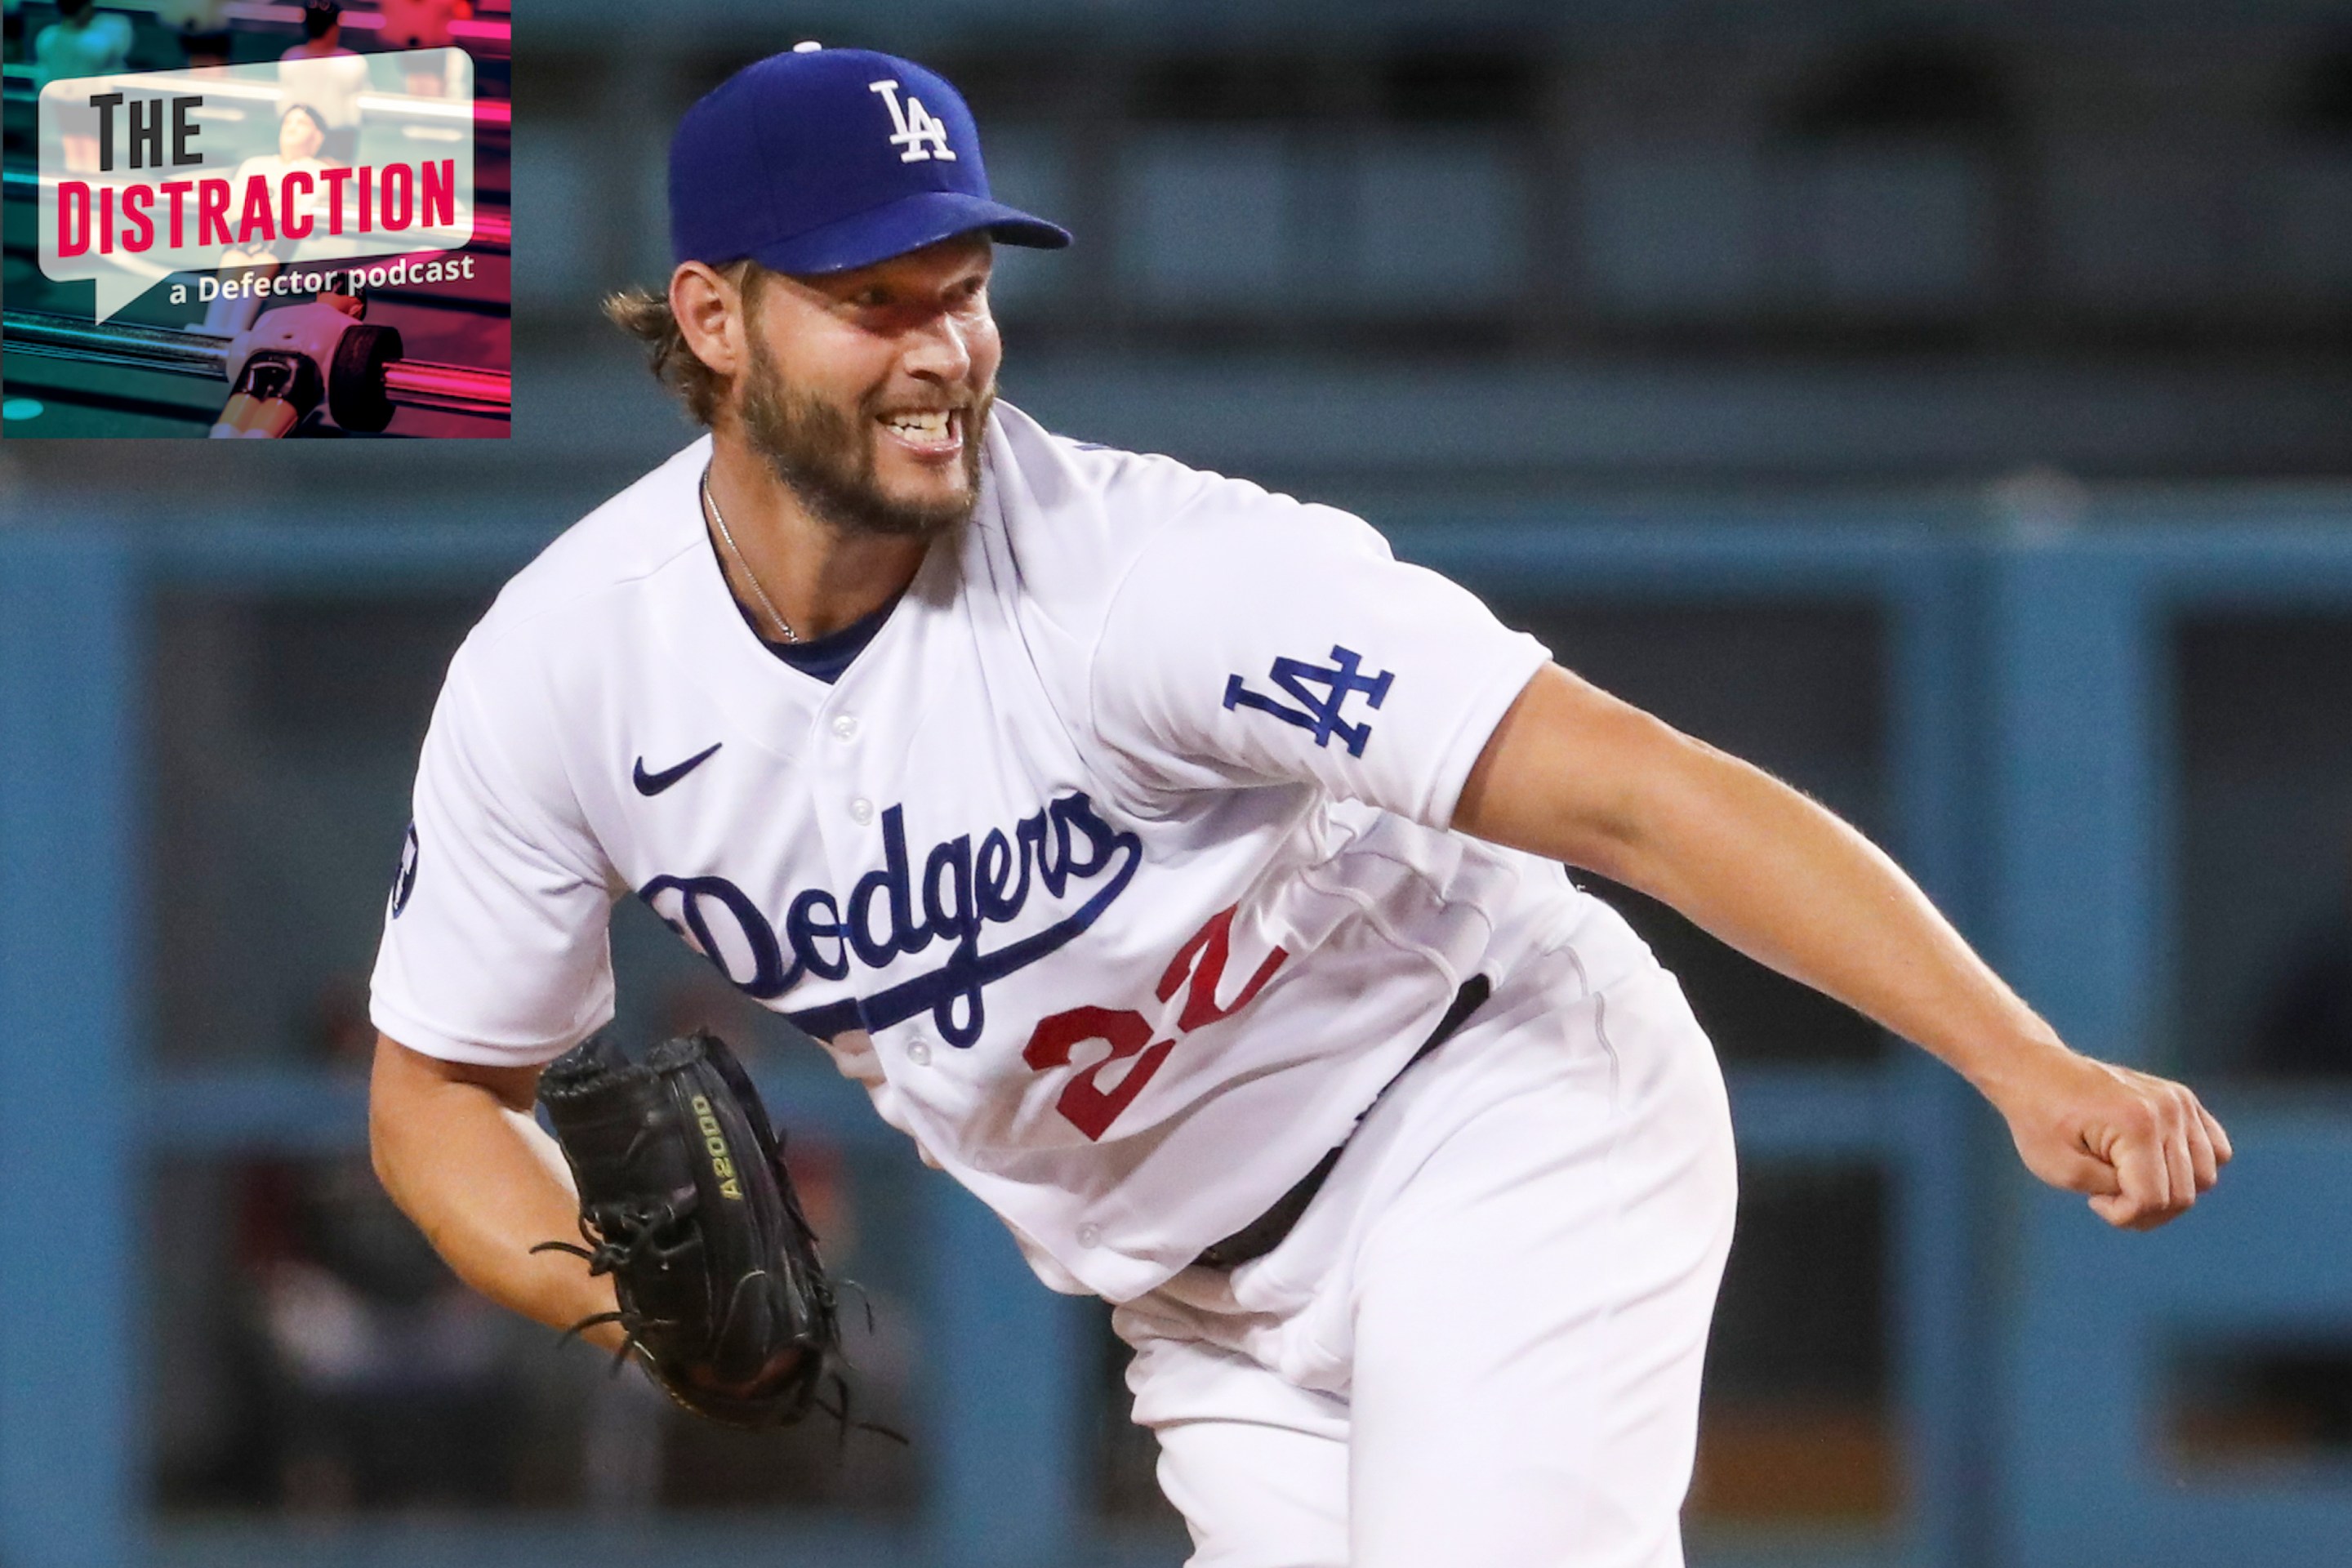 Clayton Kershaw, either smiling or grimacing after throwing a pitch against the Diamondbacks in a Dodgers win in September of 2022.